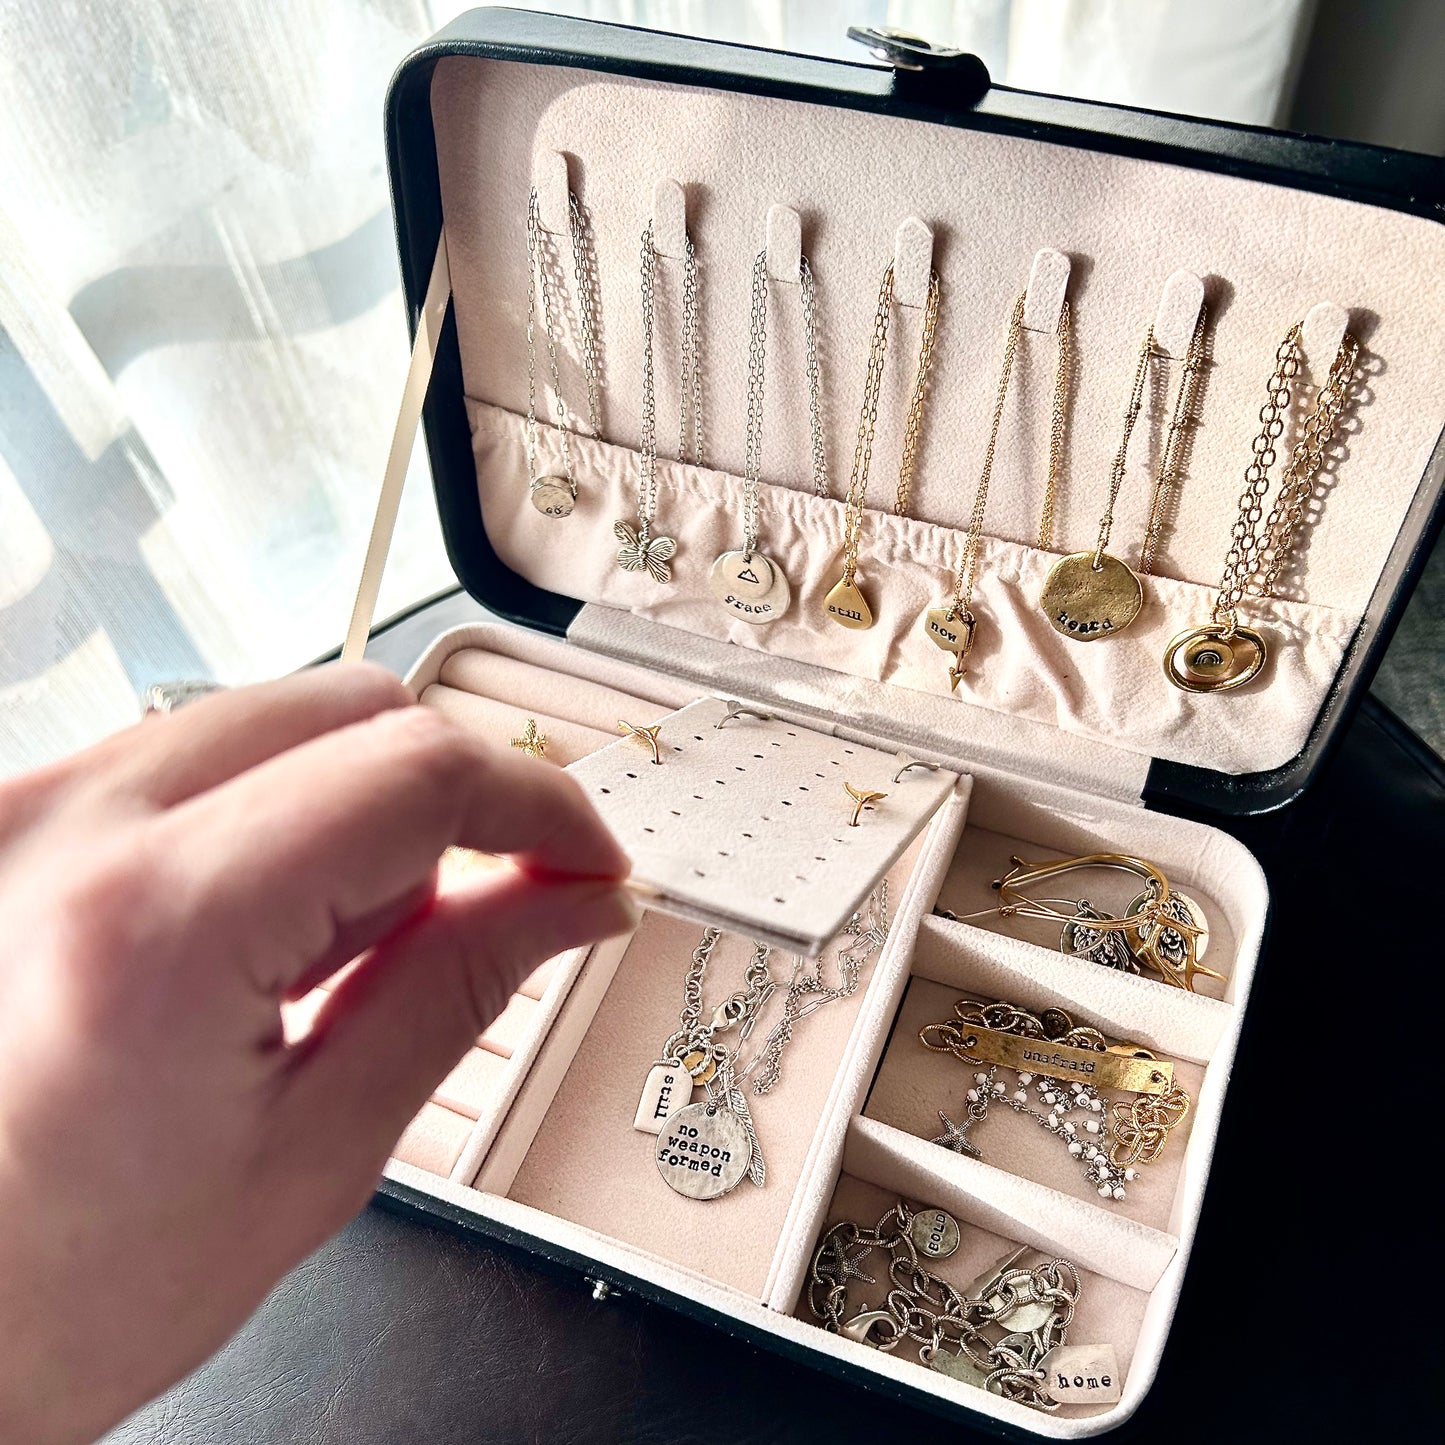 The Crowning Jewels Travel Jewelry Box